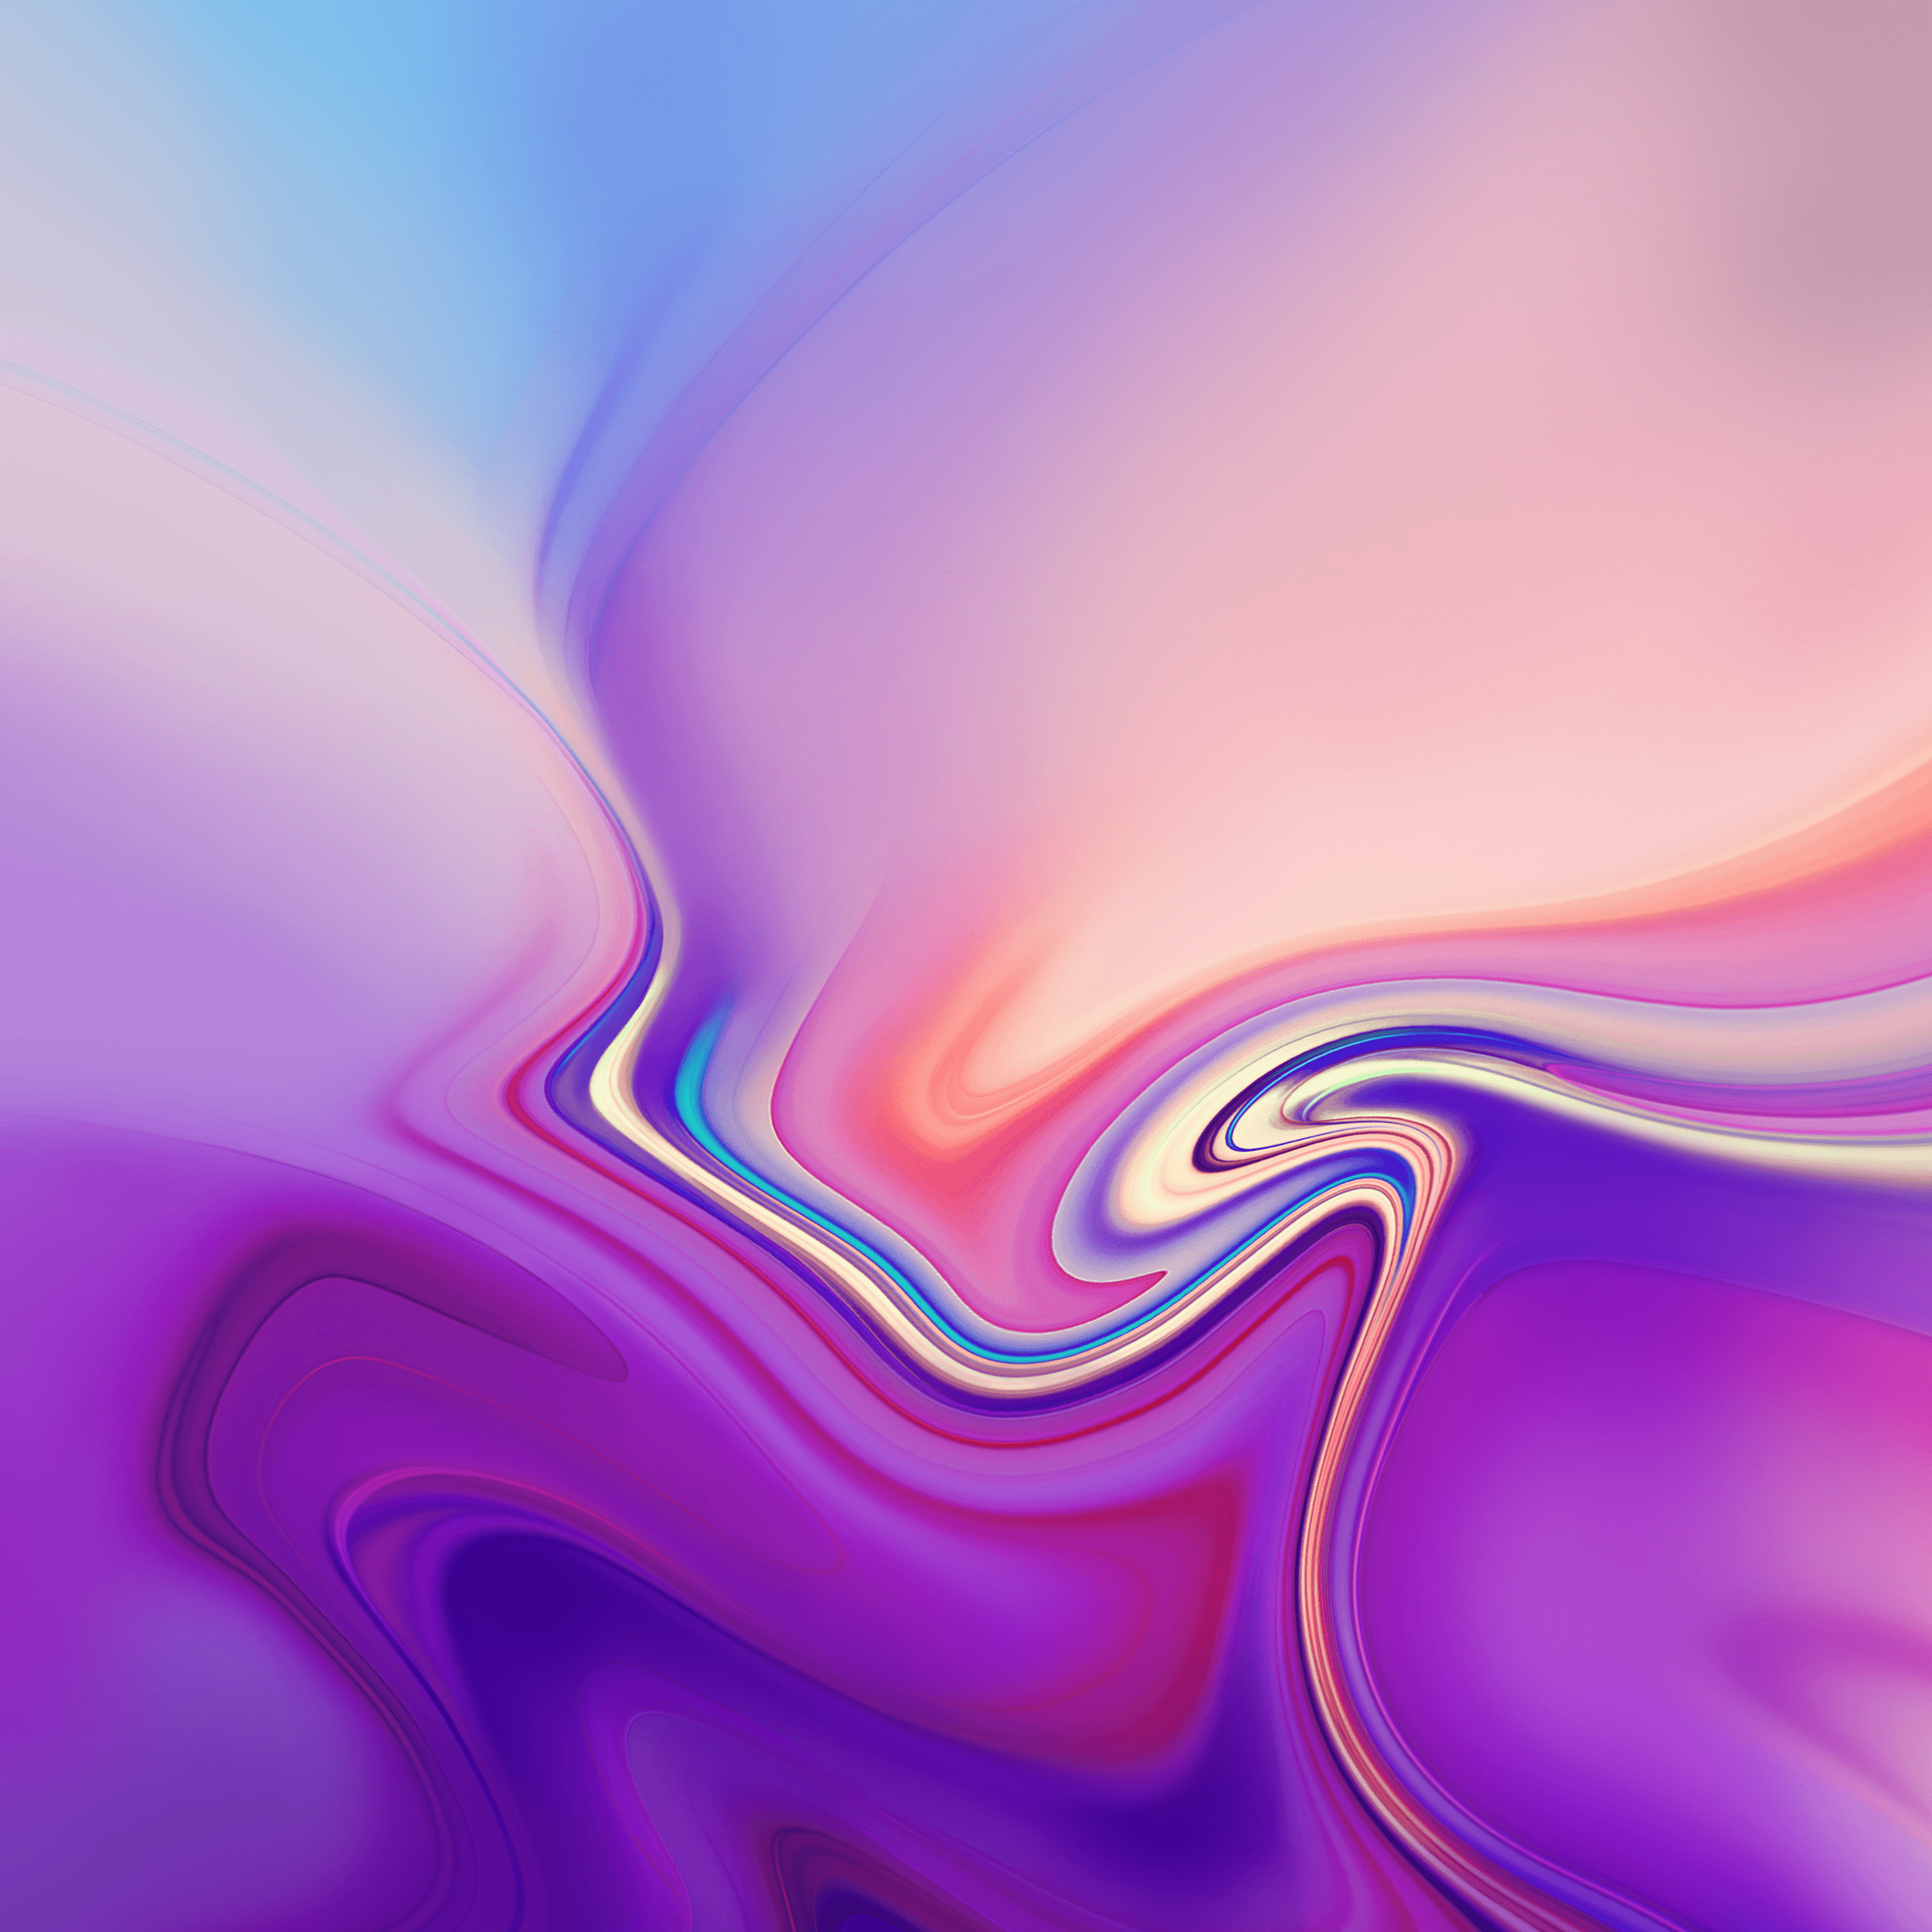 Galaxy Tab S wallpapers are here for your viewing pleasure